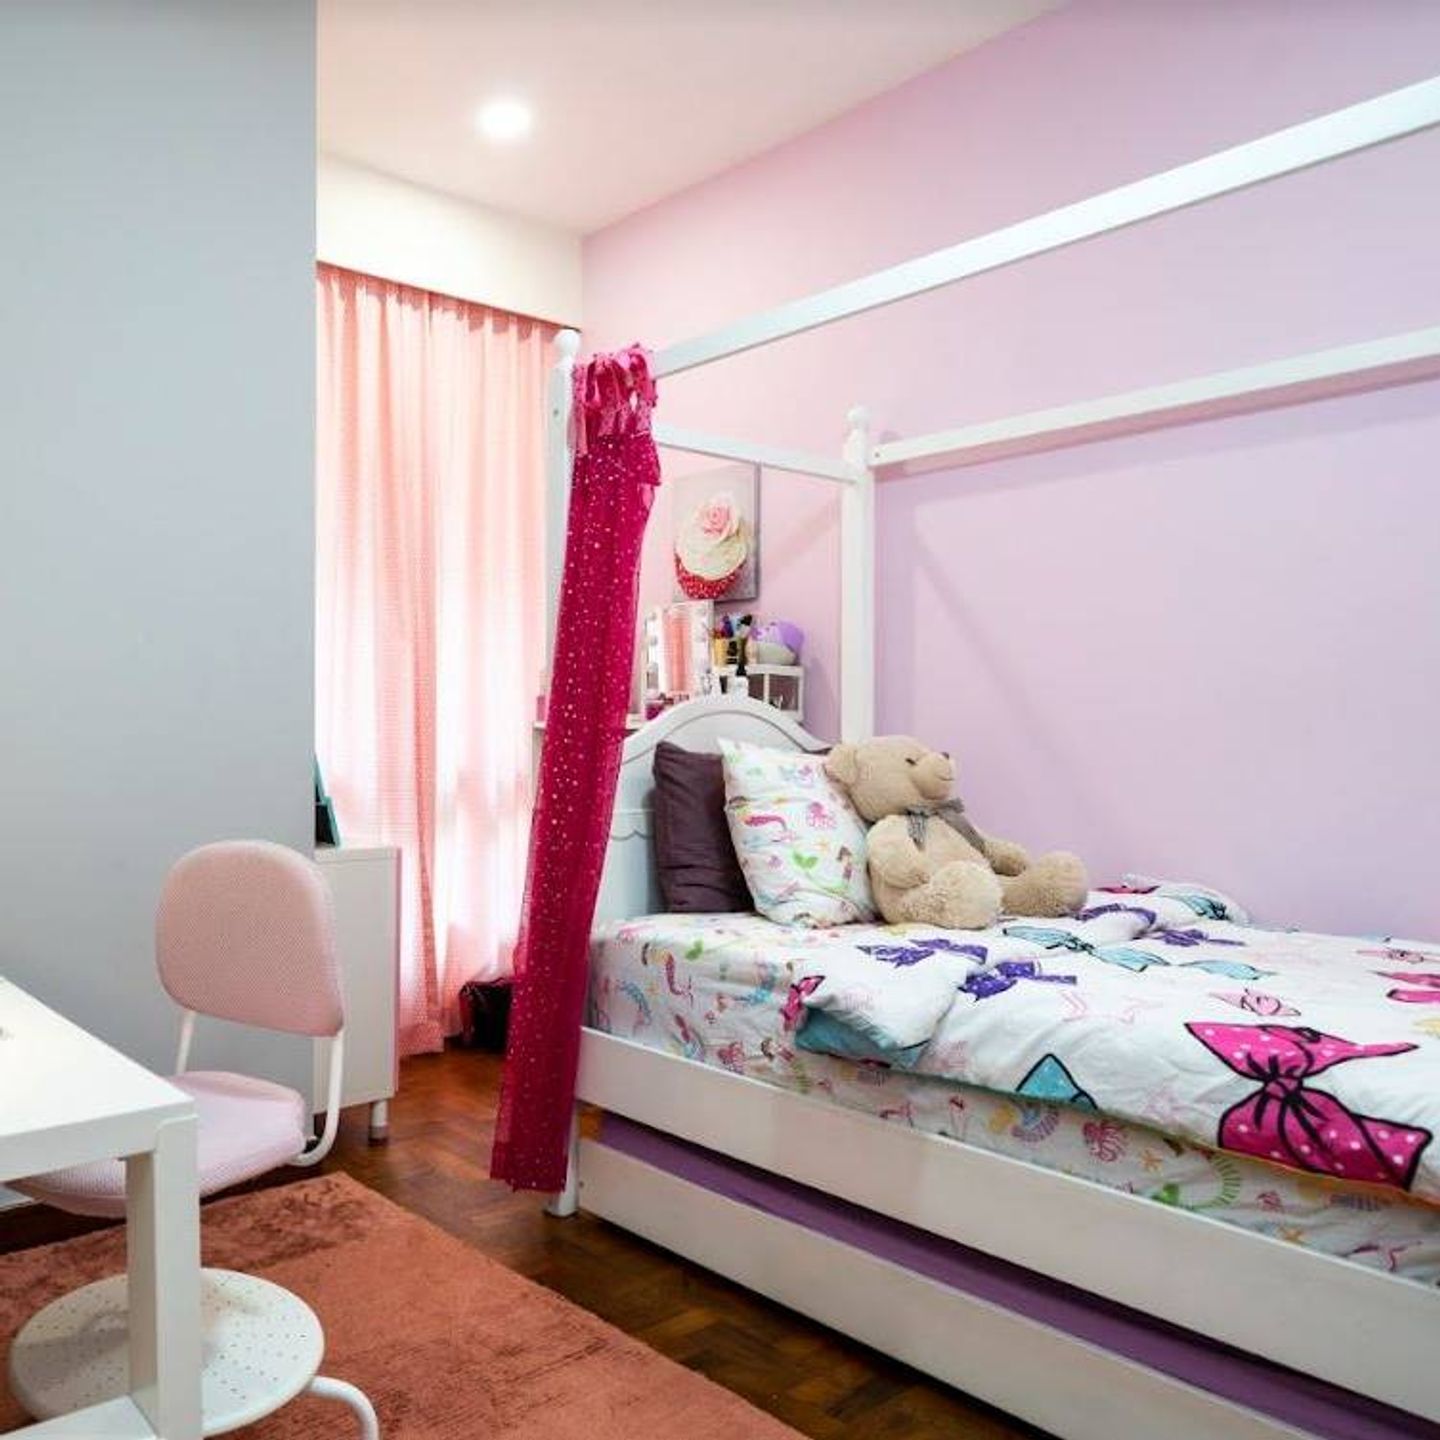 Bright Pink Bedroom Wall Paint - Livspace